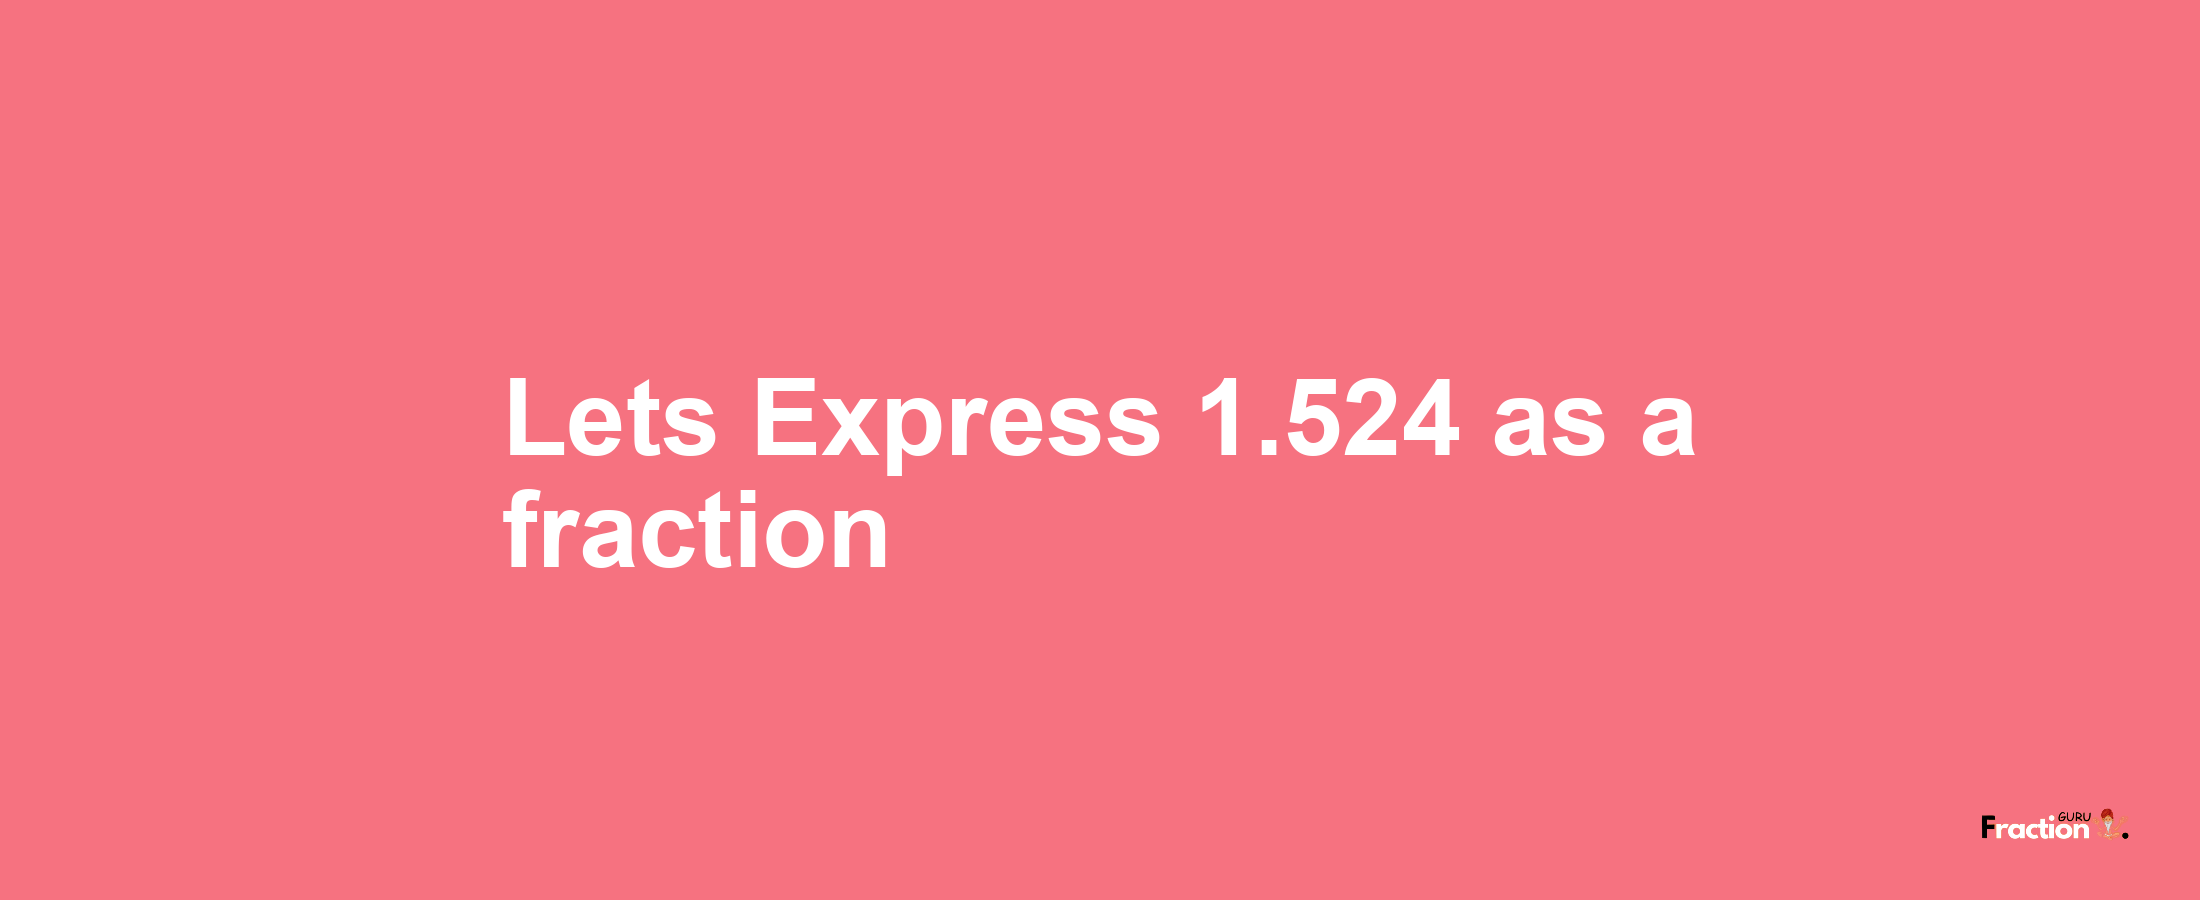 Lets Express 1.524 as afraction